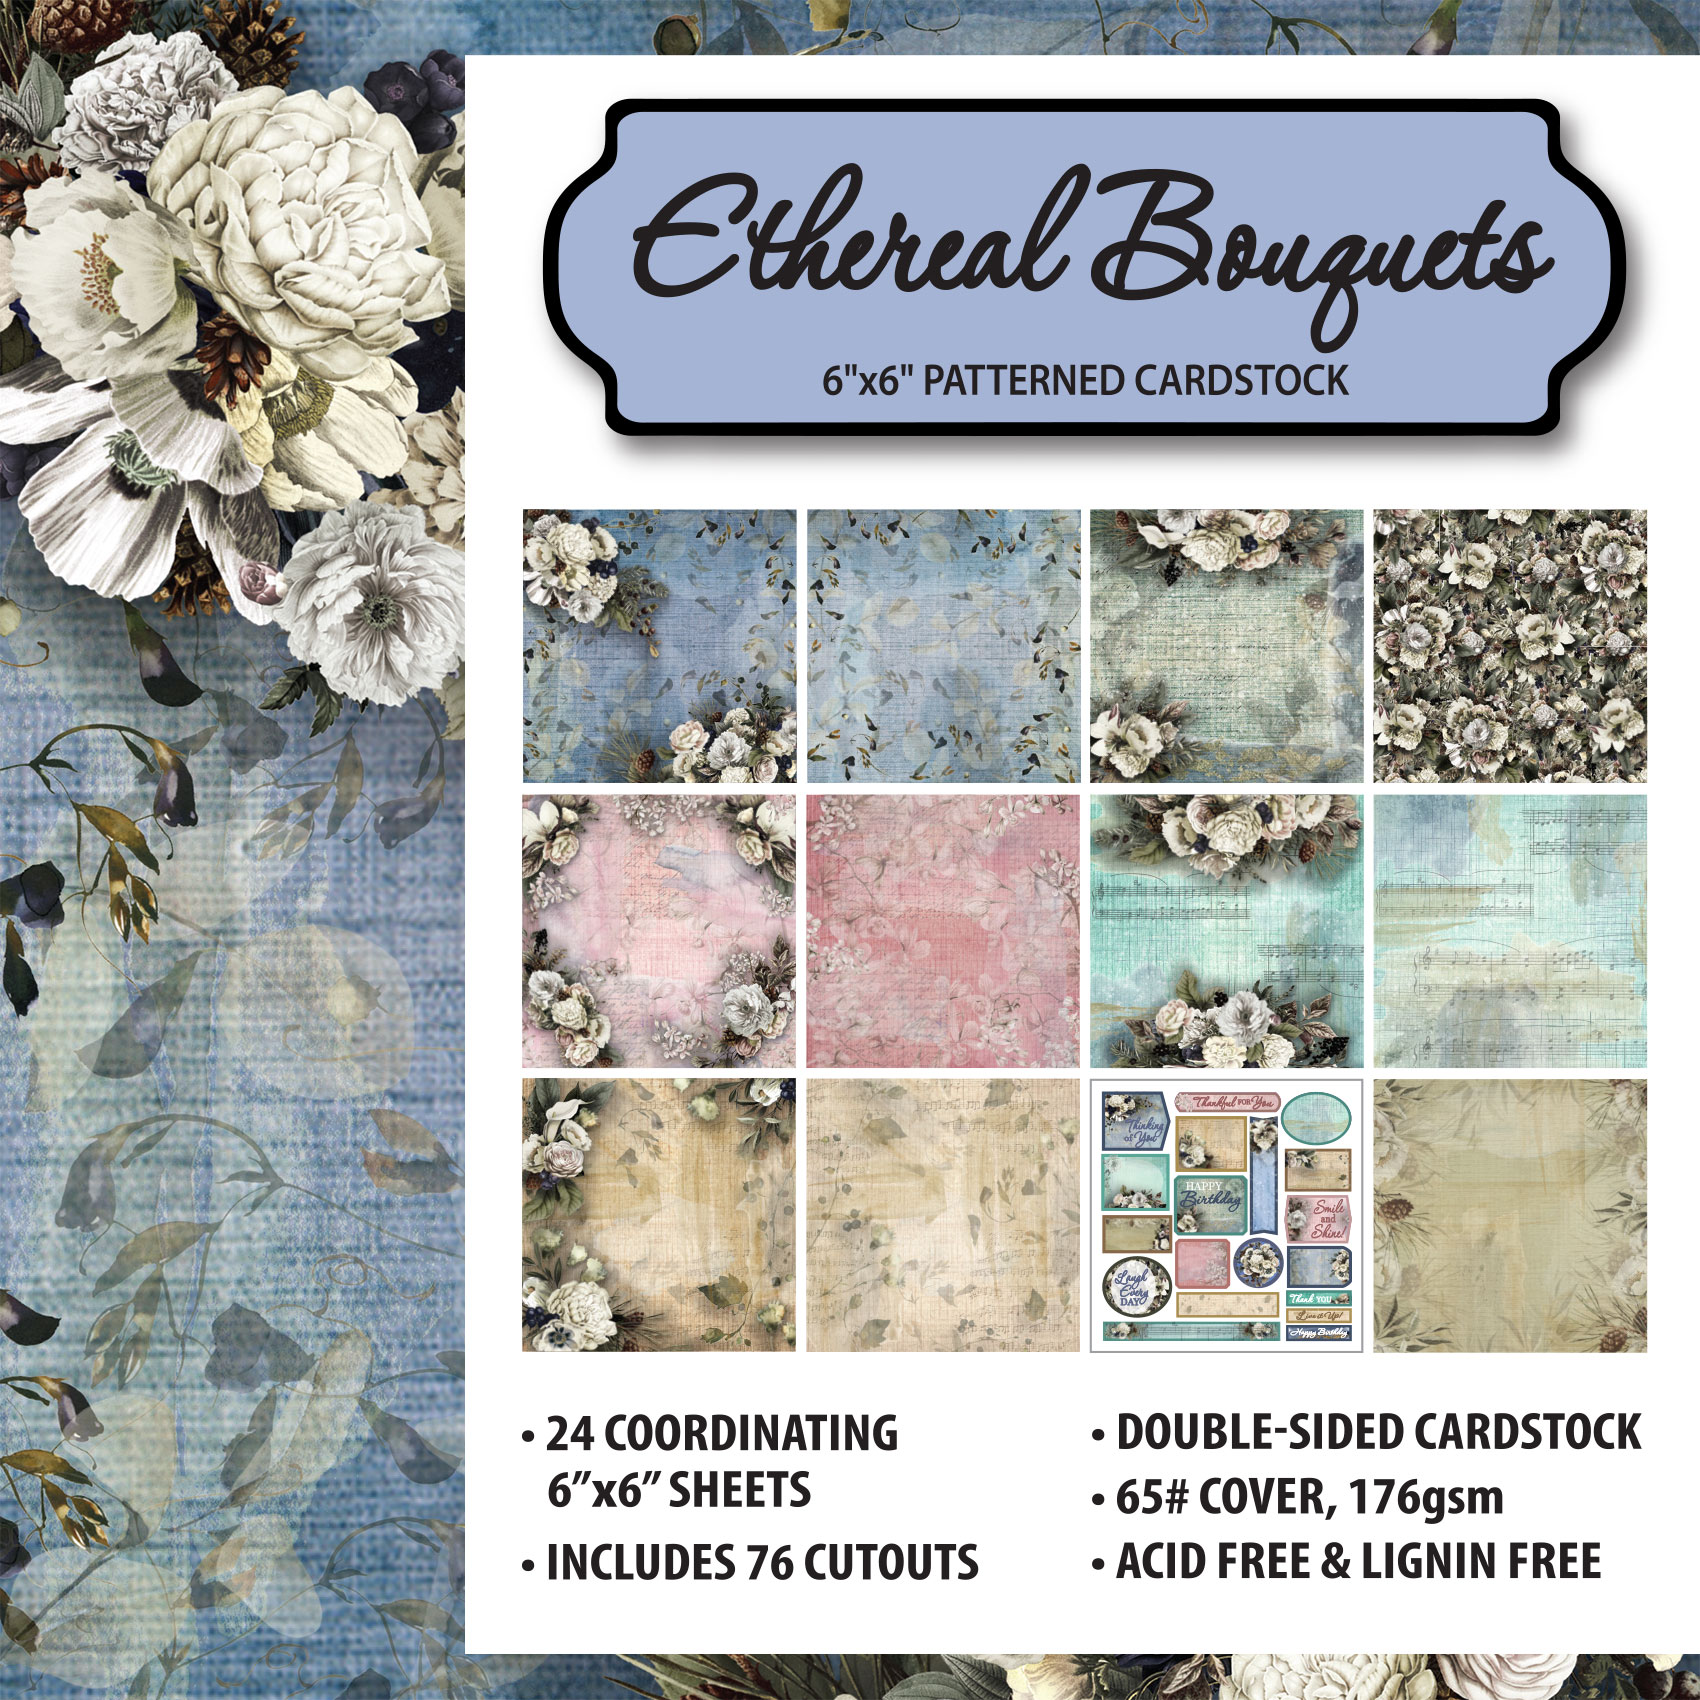 Ethereal Bouquets 6"x6" Patterned Cardstock